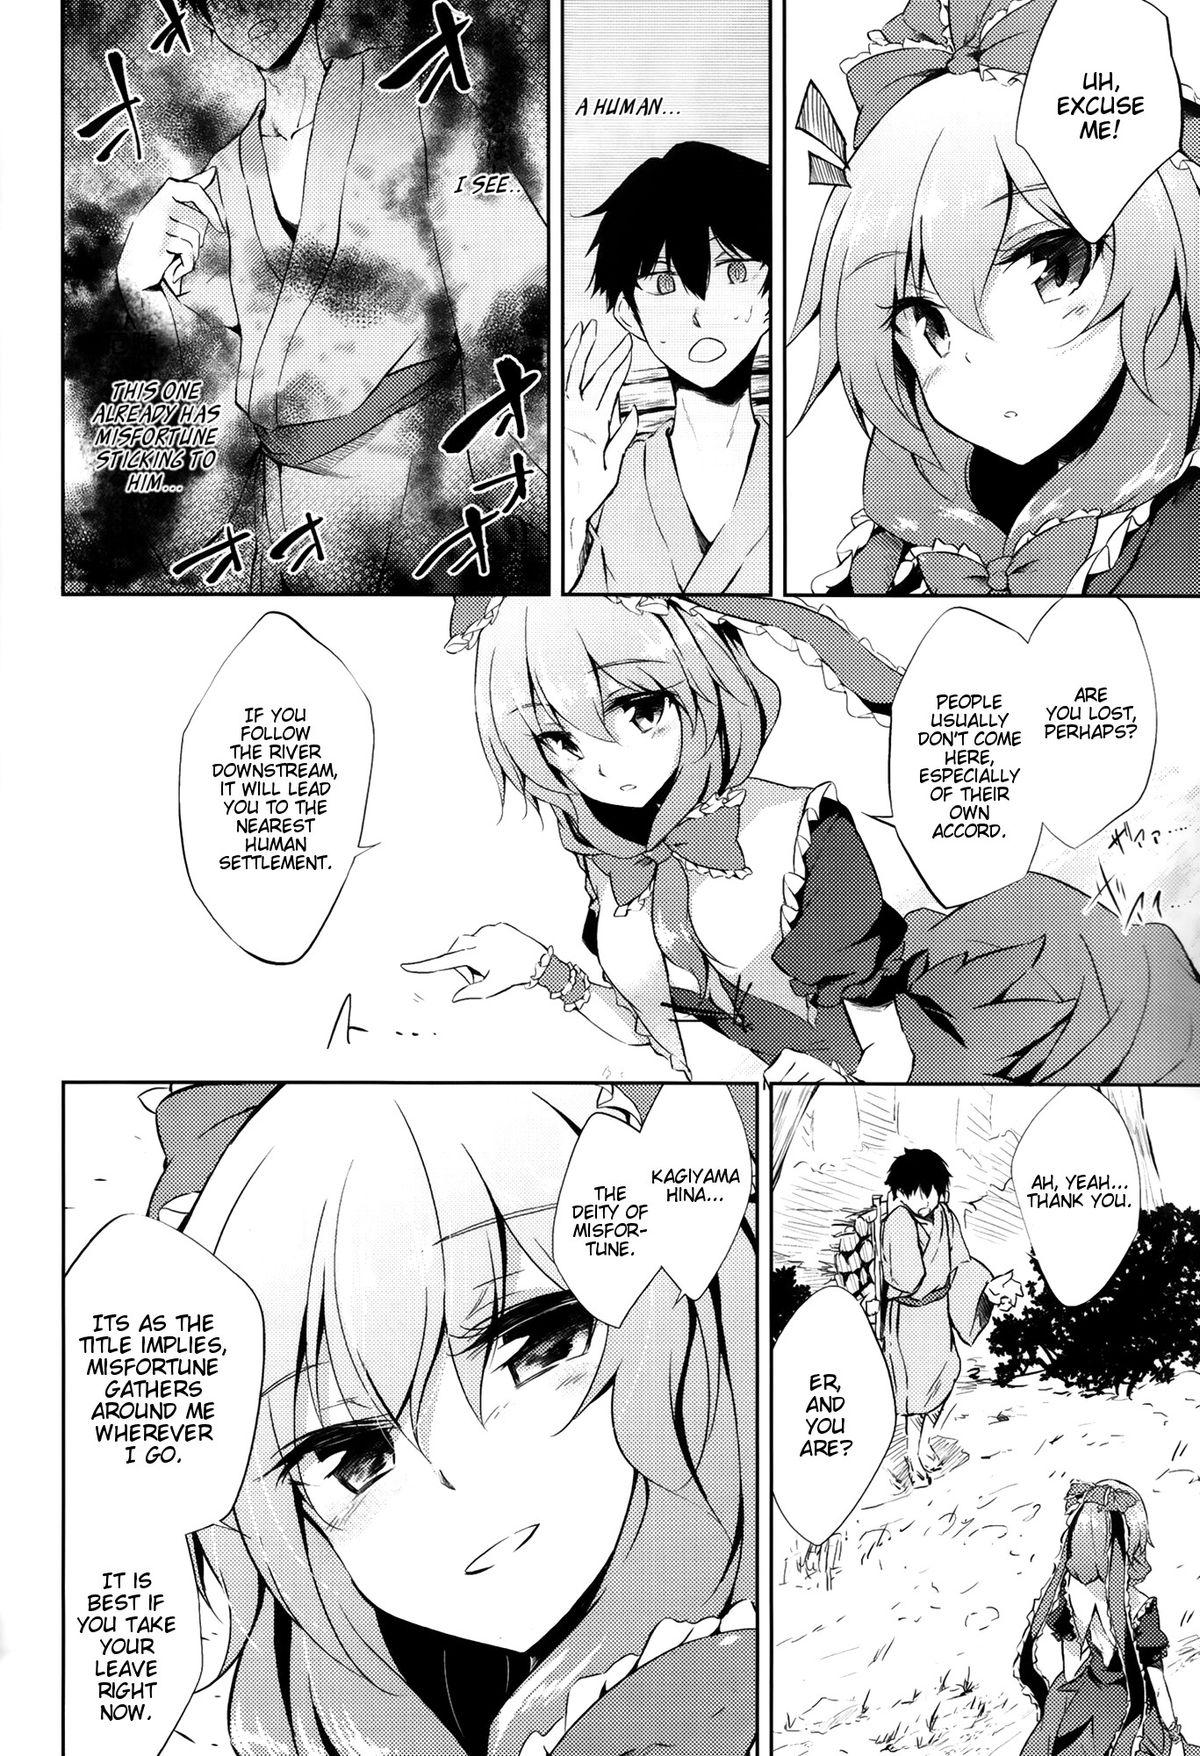 Camwhore *Chuui* Horeru to Yakui kara | *Warning* Fall in love at your own risk - Touhou project Caught - Page 4